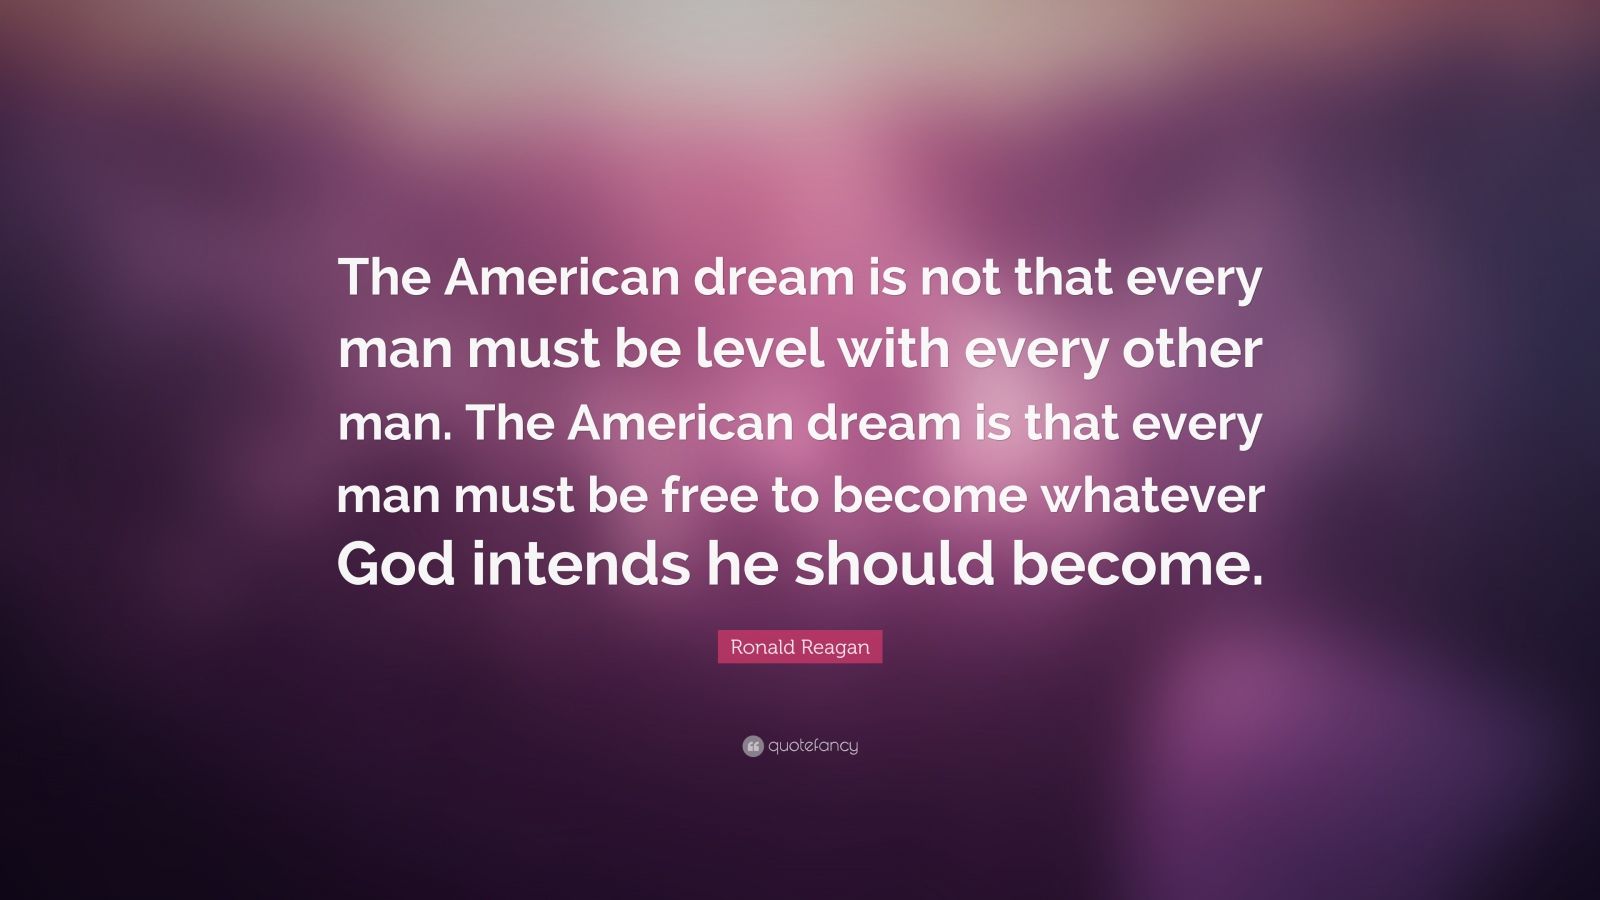 69242 Ronald Reagan Quote The American dream is not that every man must